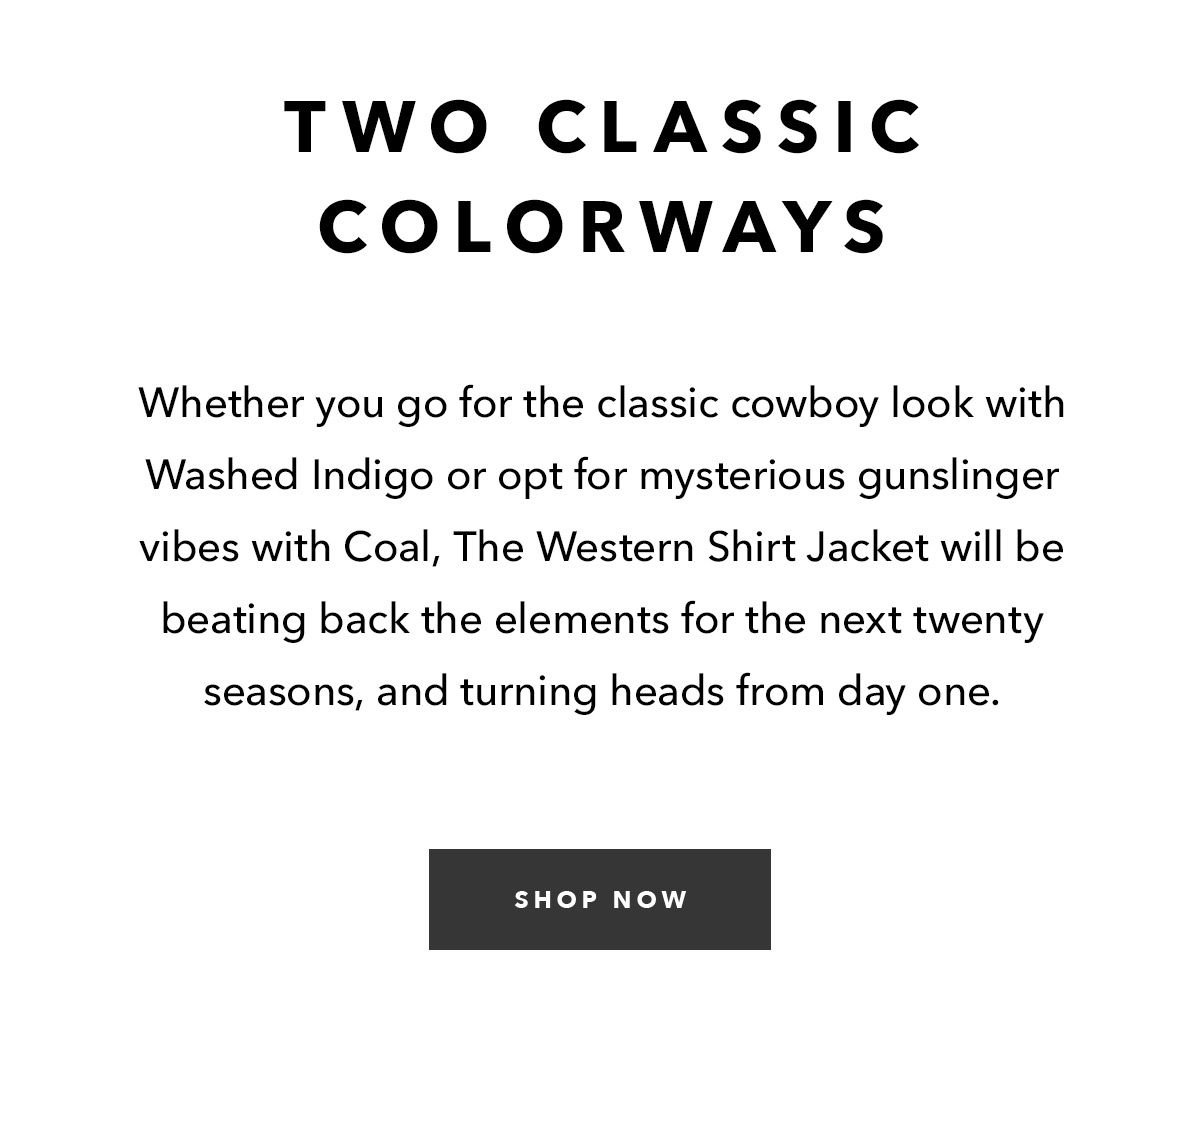 Two Classic Colorways: Whether you go for the classic cowboy look with Washed Indigo or opt for mysterious gunslinger vibes with Coal, The Western Shirt Jacket will be beating back the elements for the next twenty seasons, and turning heads from day one.